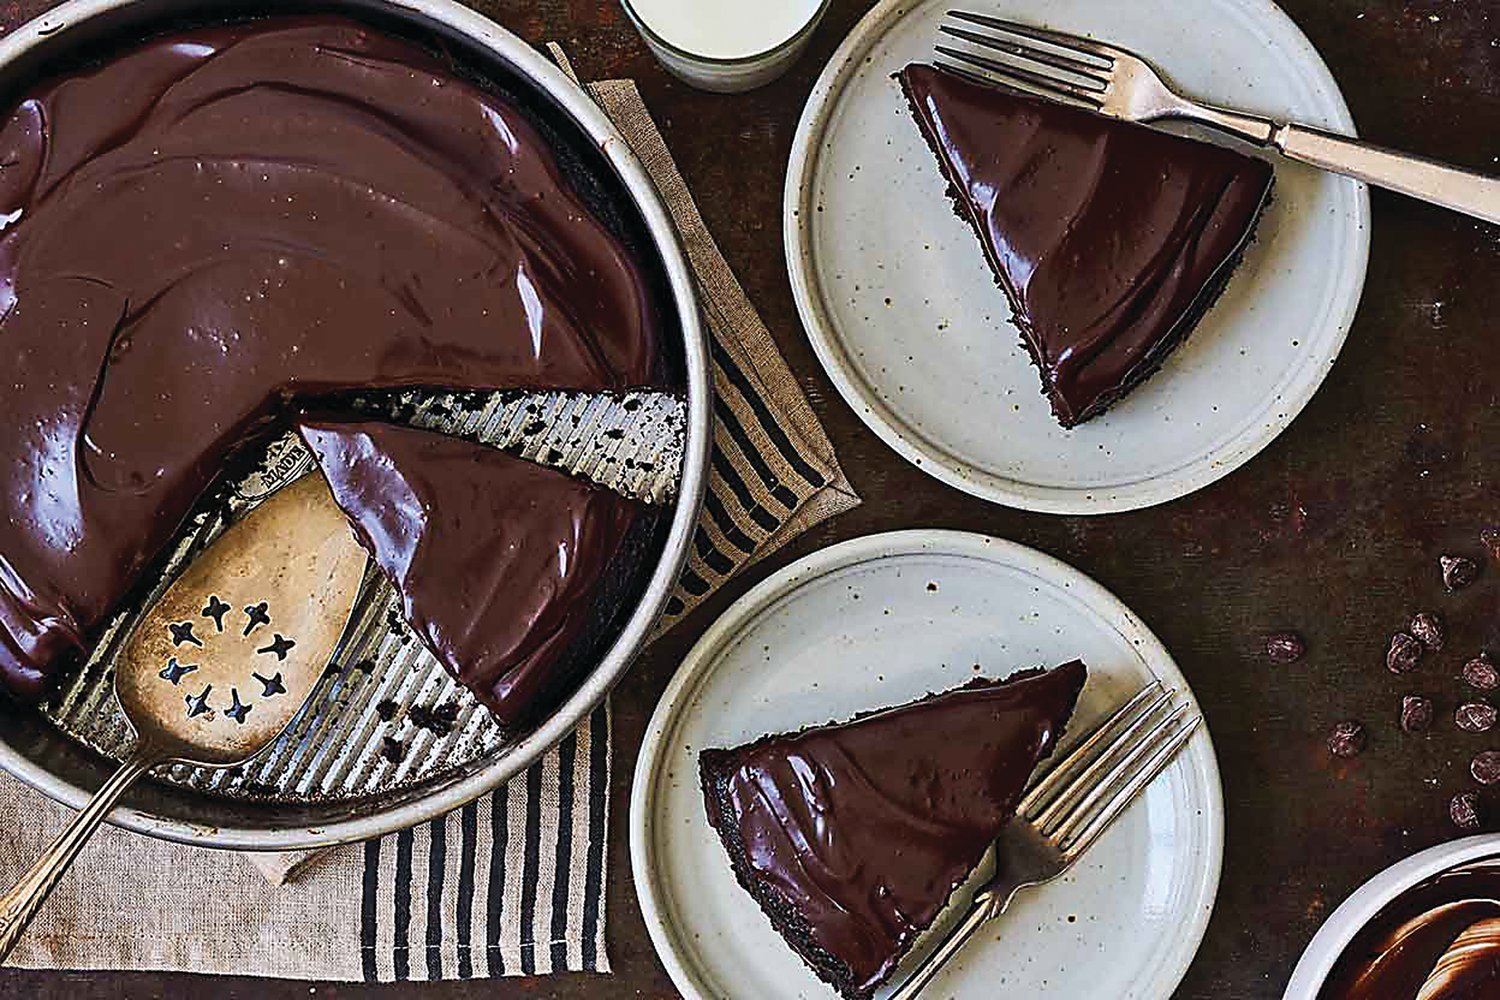 This simple chocolate cake, which can be made dairy- and/or gluten-free, was named the “recipe of the centuries” by King Arthur Flour.